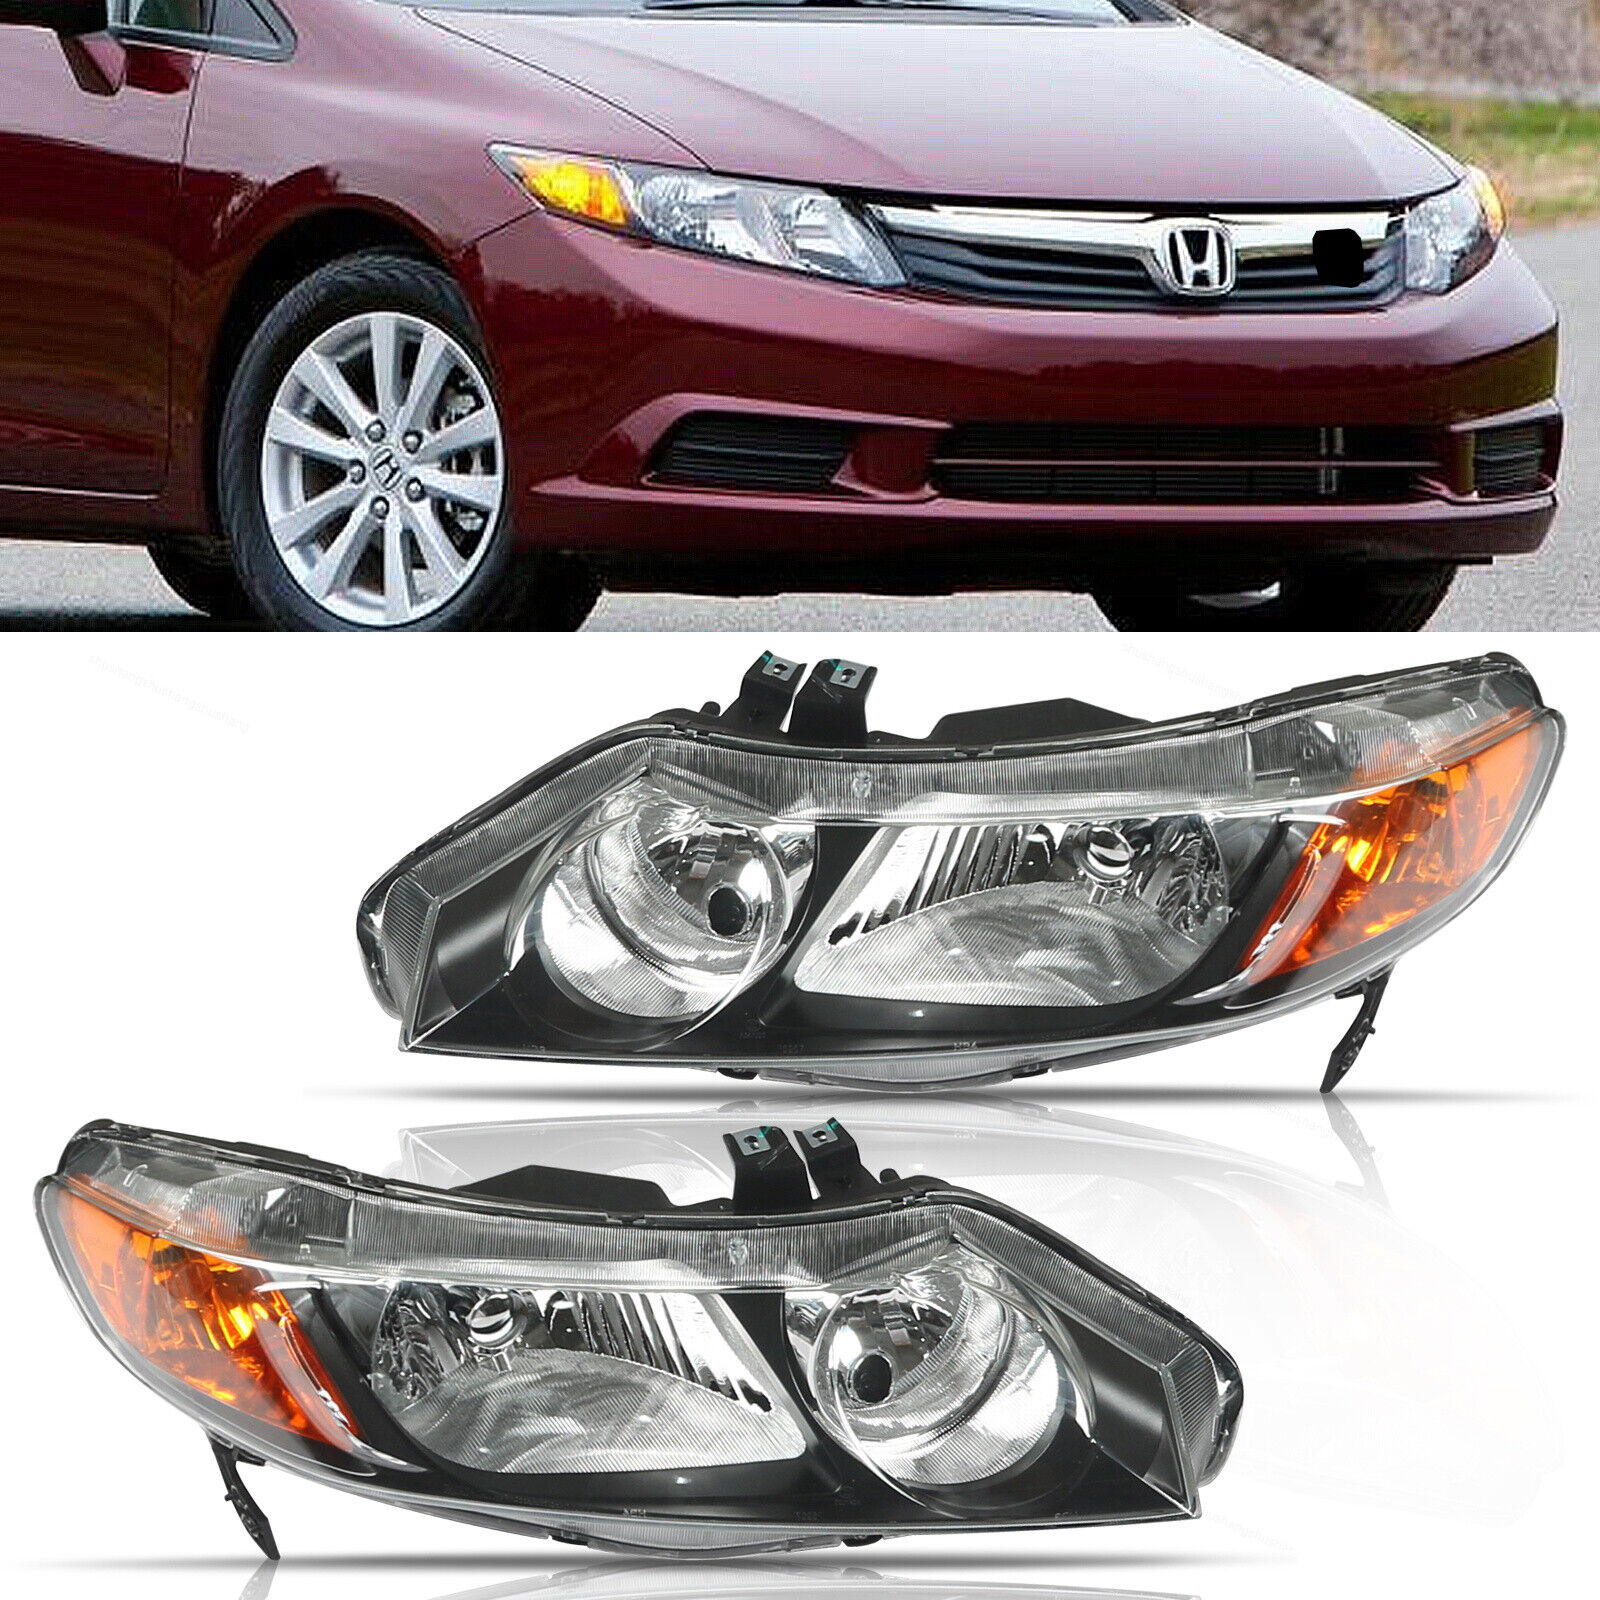 For Honda Civic Coupe 2006-2011 Headlights Assembly Pair Black Housing Headlamps